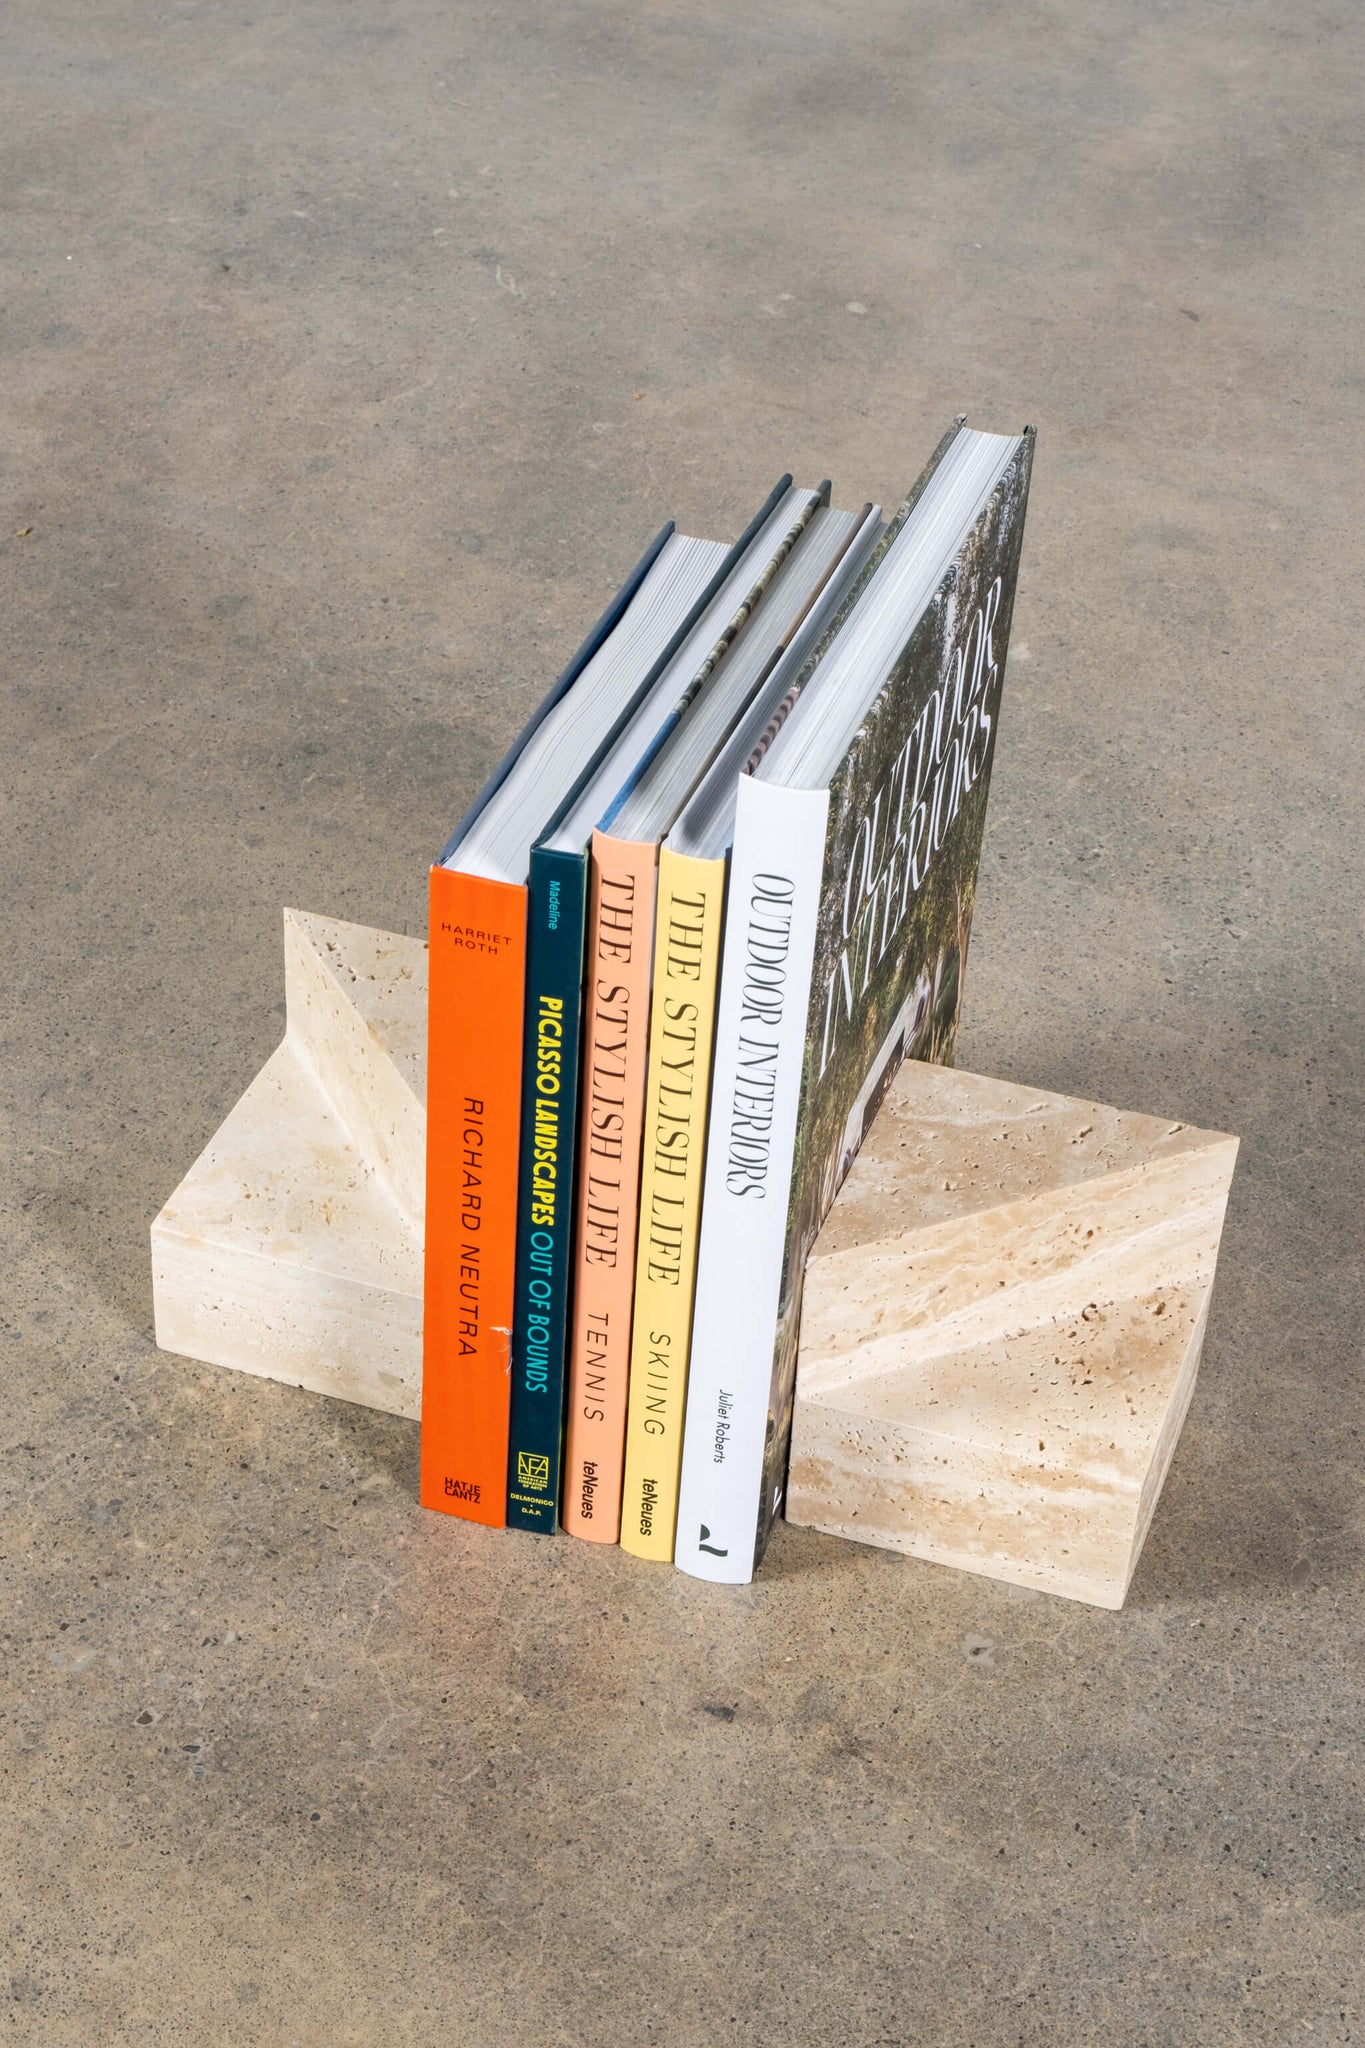 Pair of Travertine Cube Bookends, shown with books